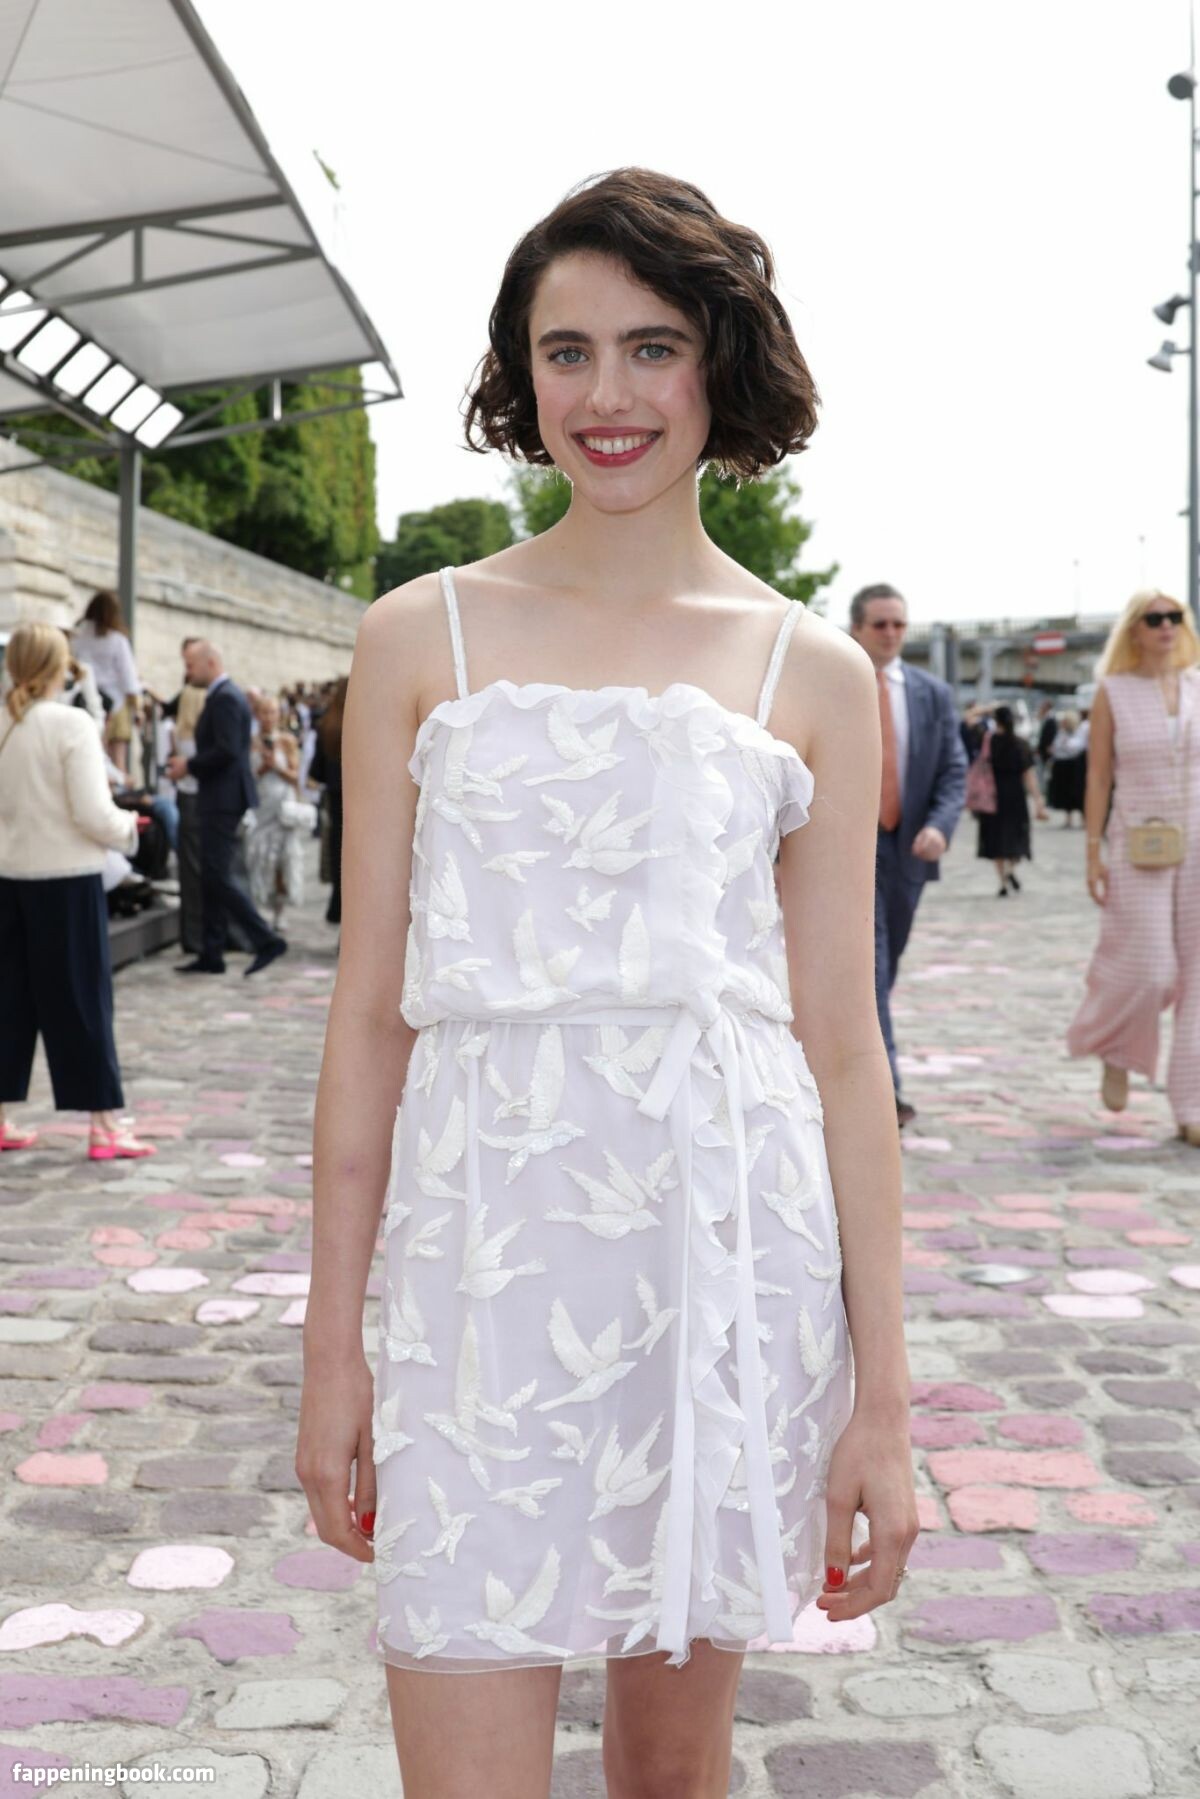 Margaret Qualley Nude The Fappening Photo Fappeningbook